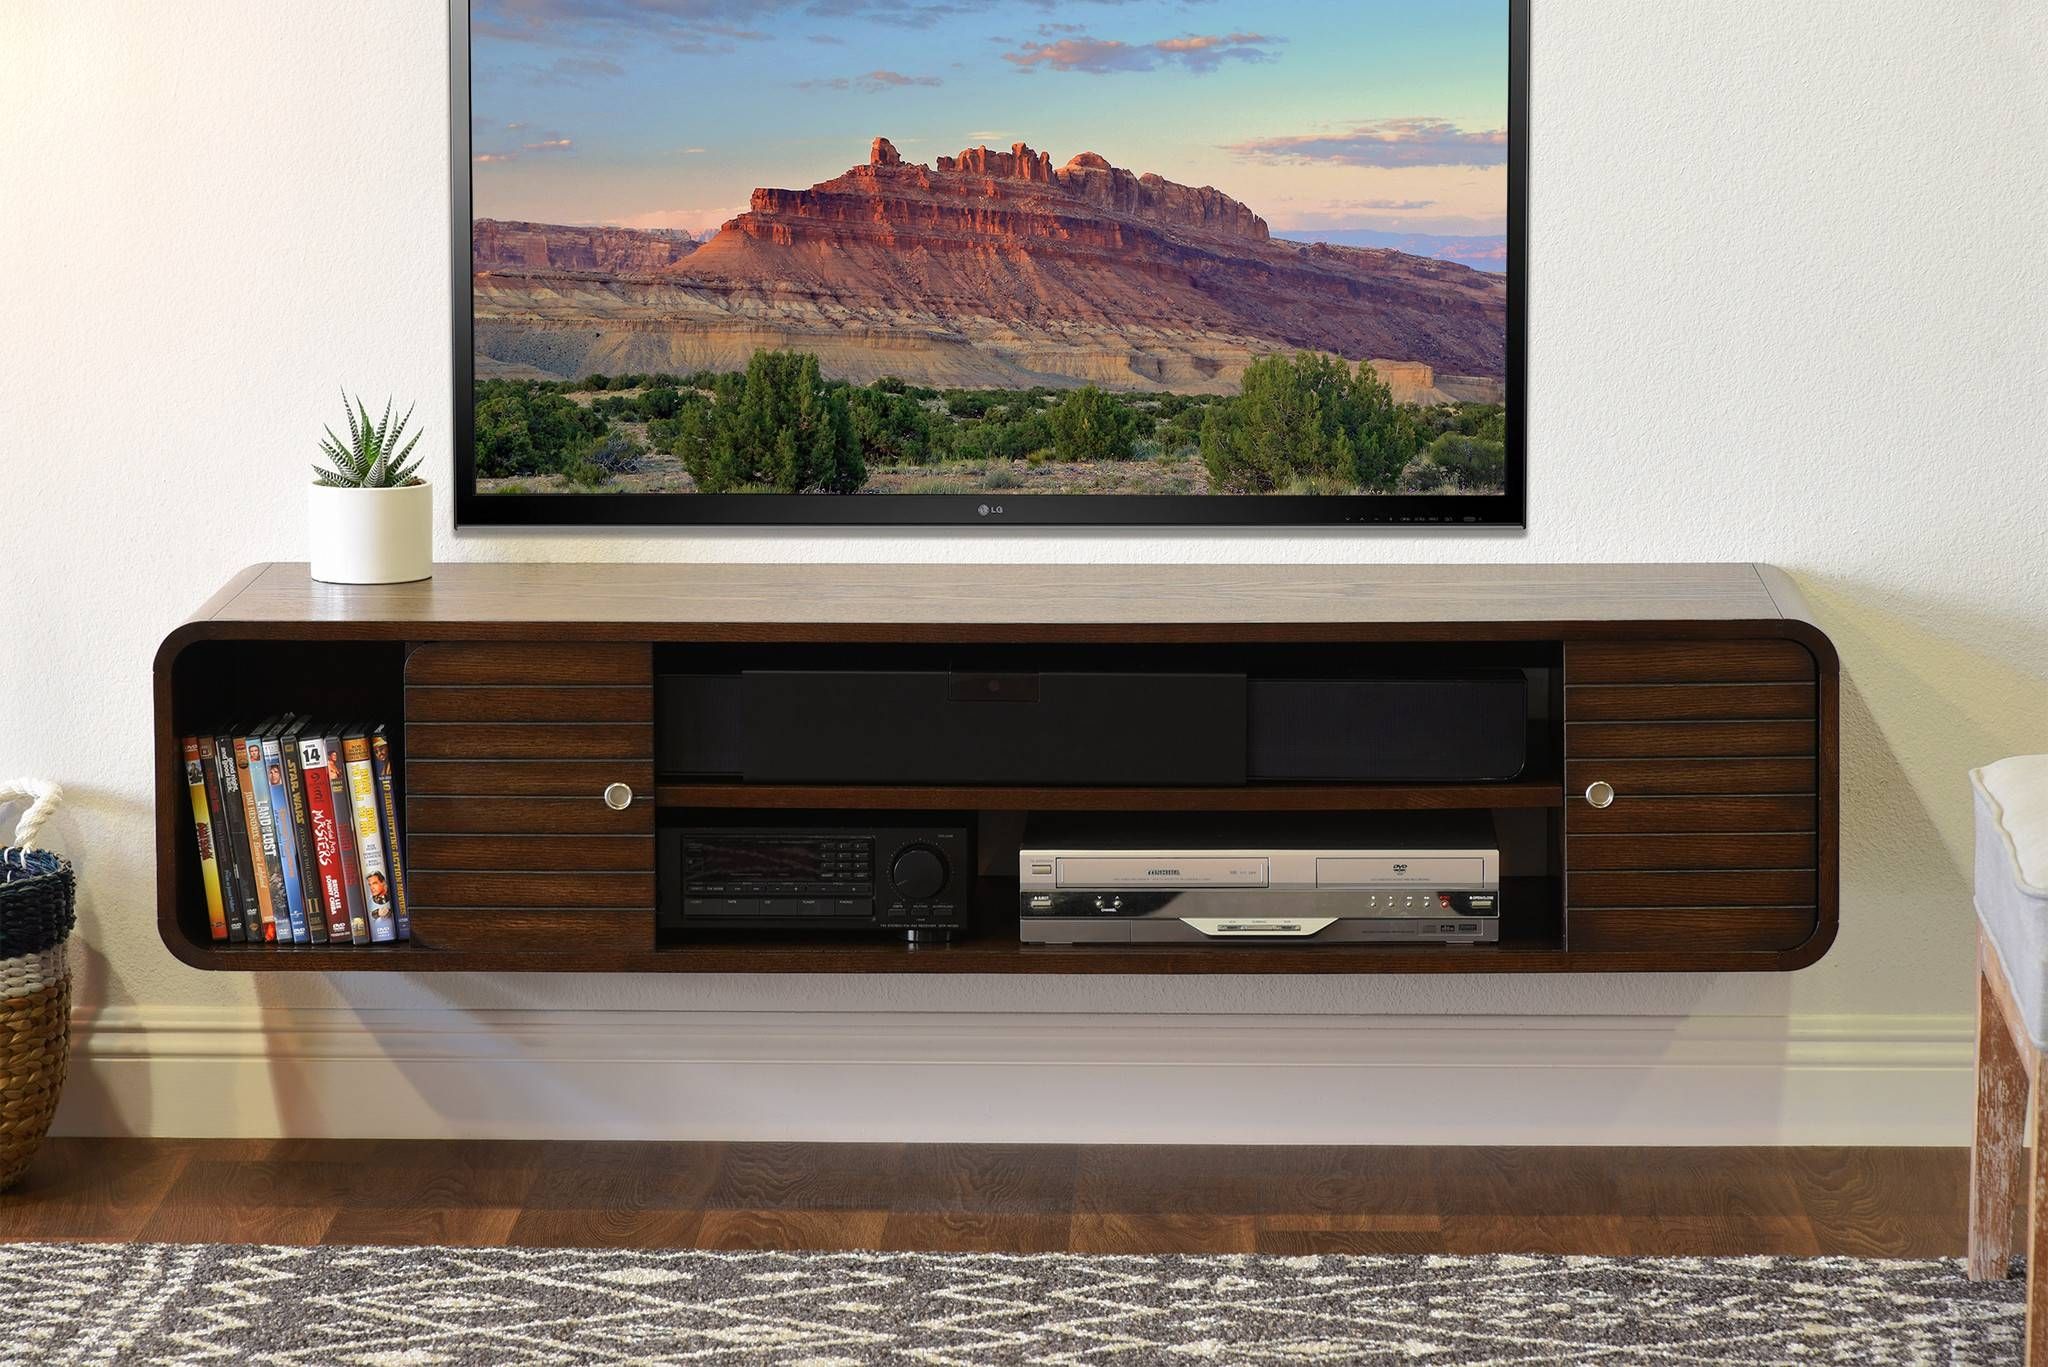 Rustic Brown Polished Oak Wood Wall Mounted Tv Cabinet Shelf With Inside Under Tv Cabinets (View 5 of 15)